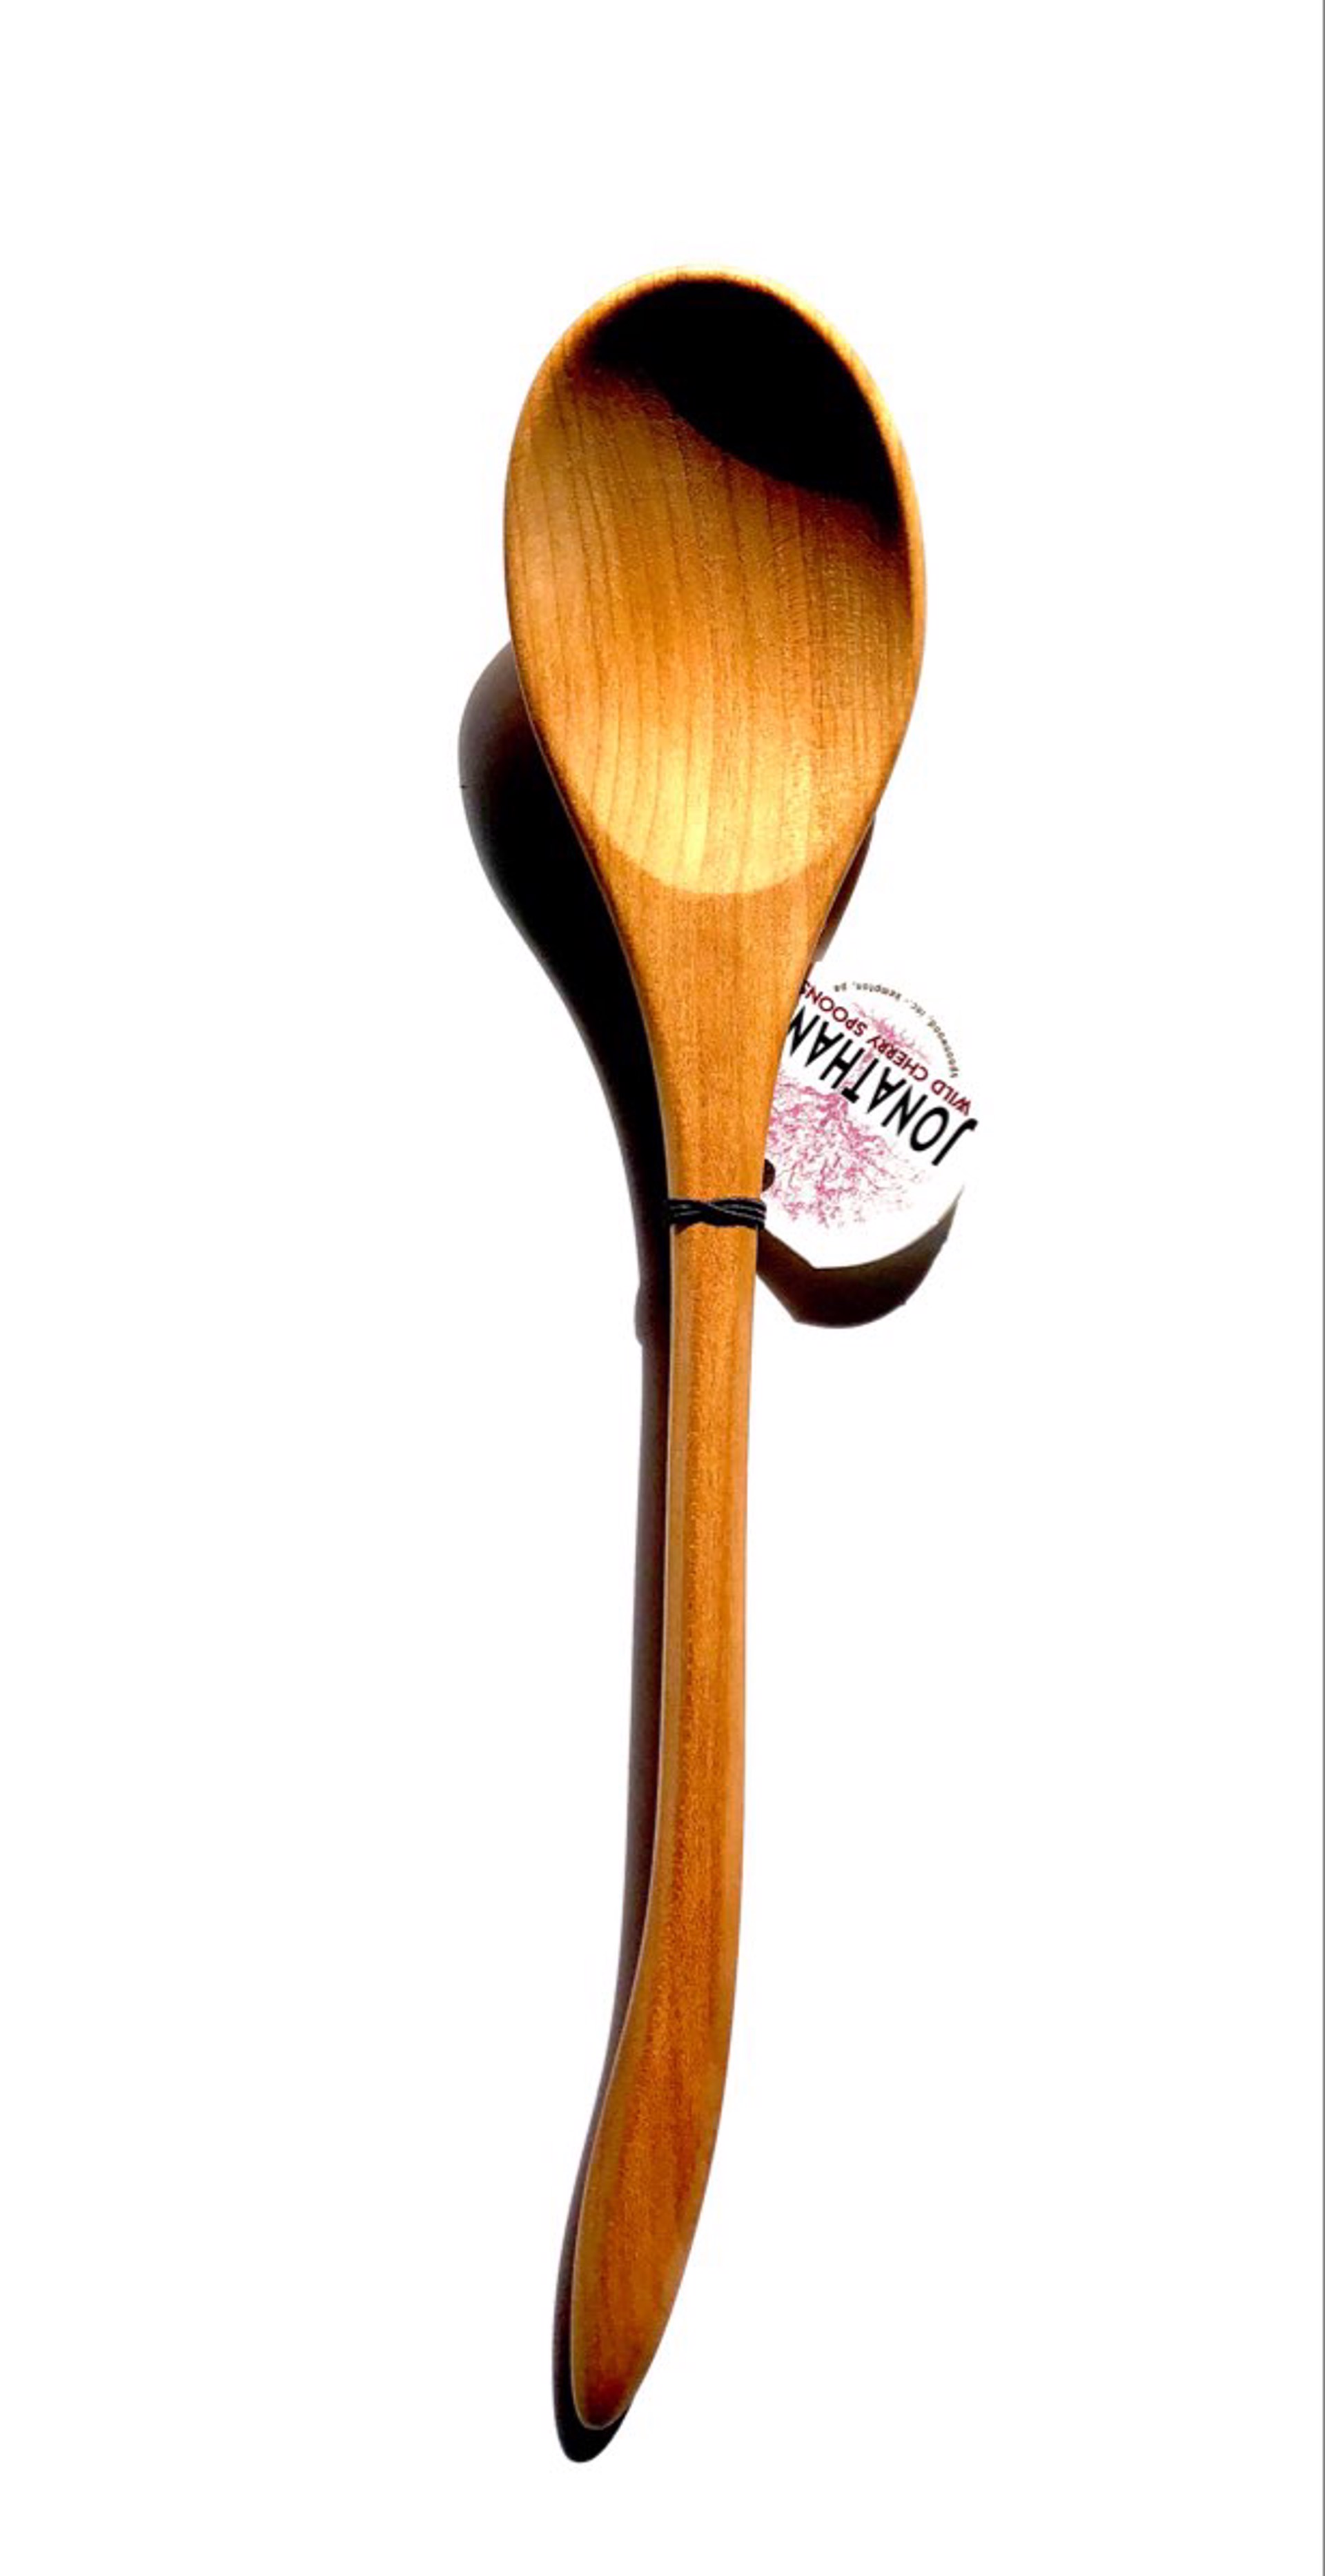 Ordinary Spoon by Jonathan's Spoons